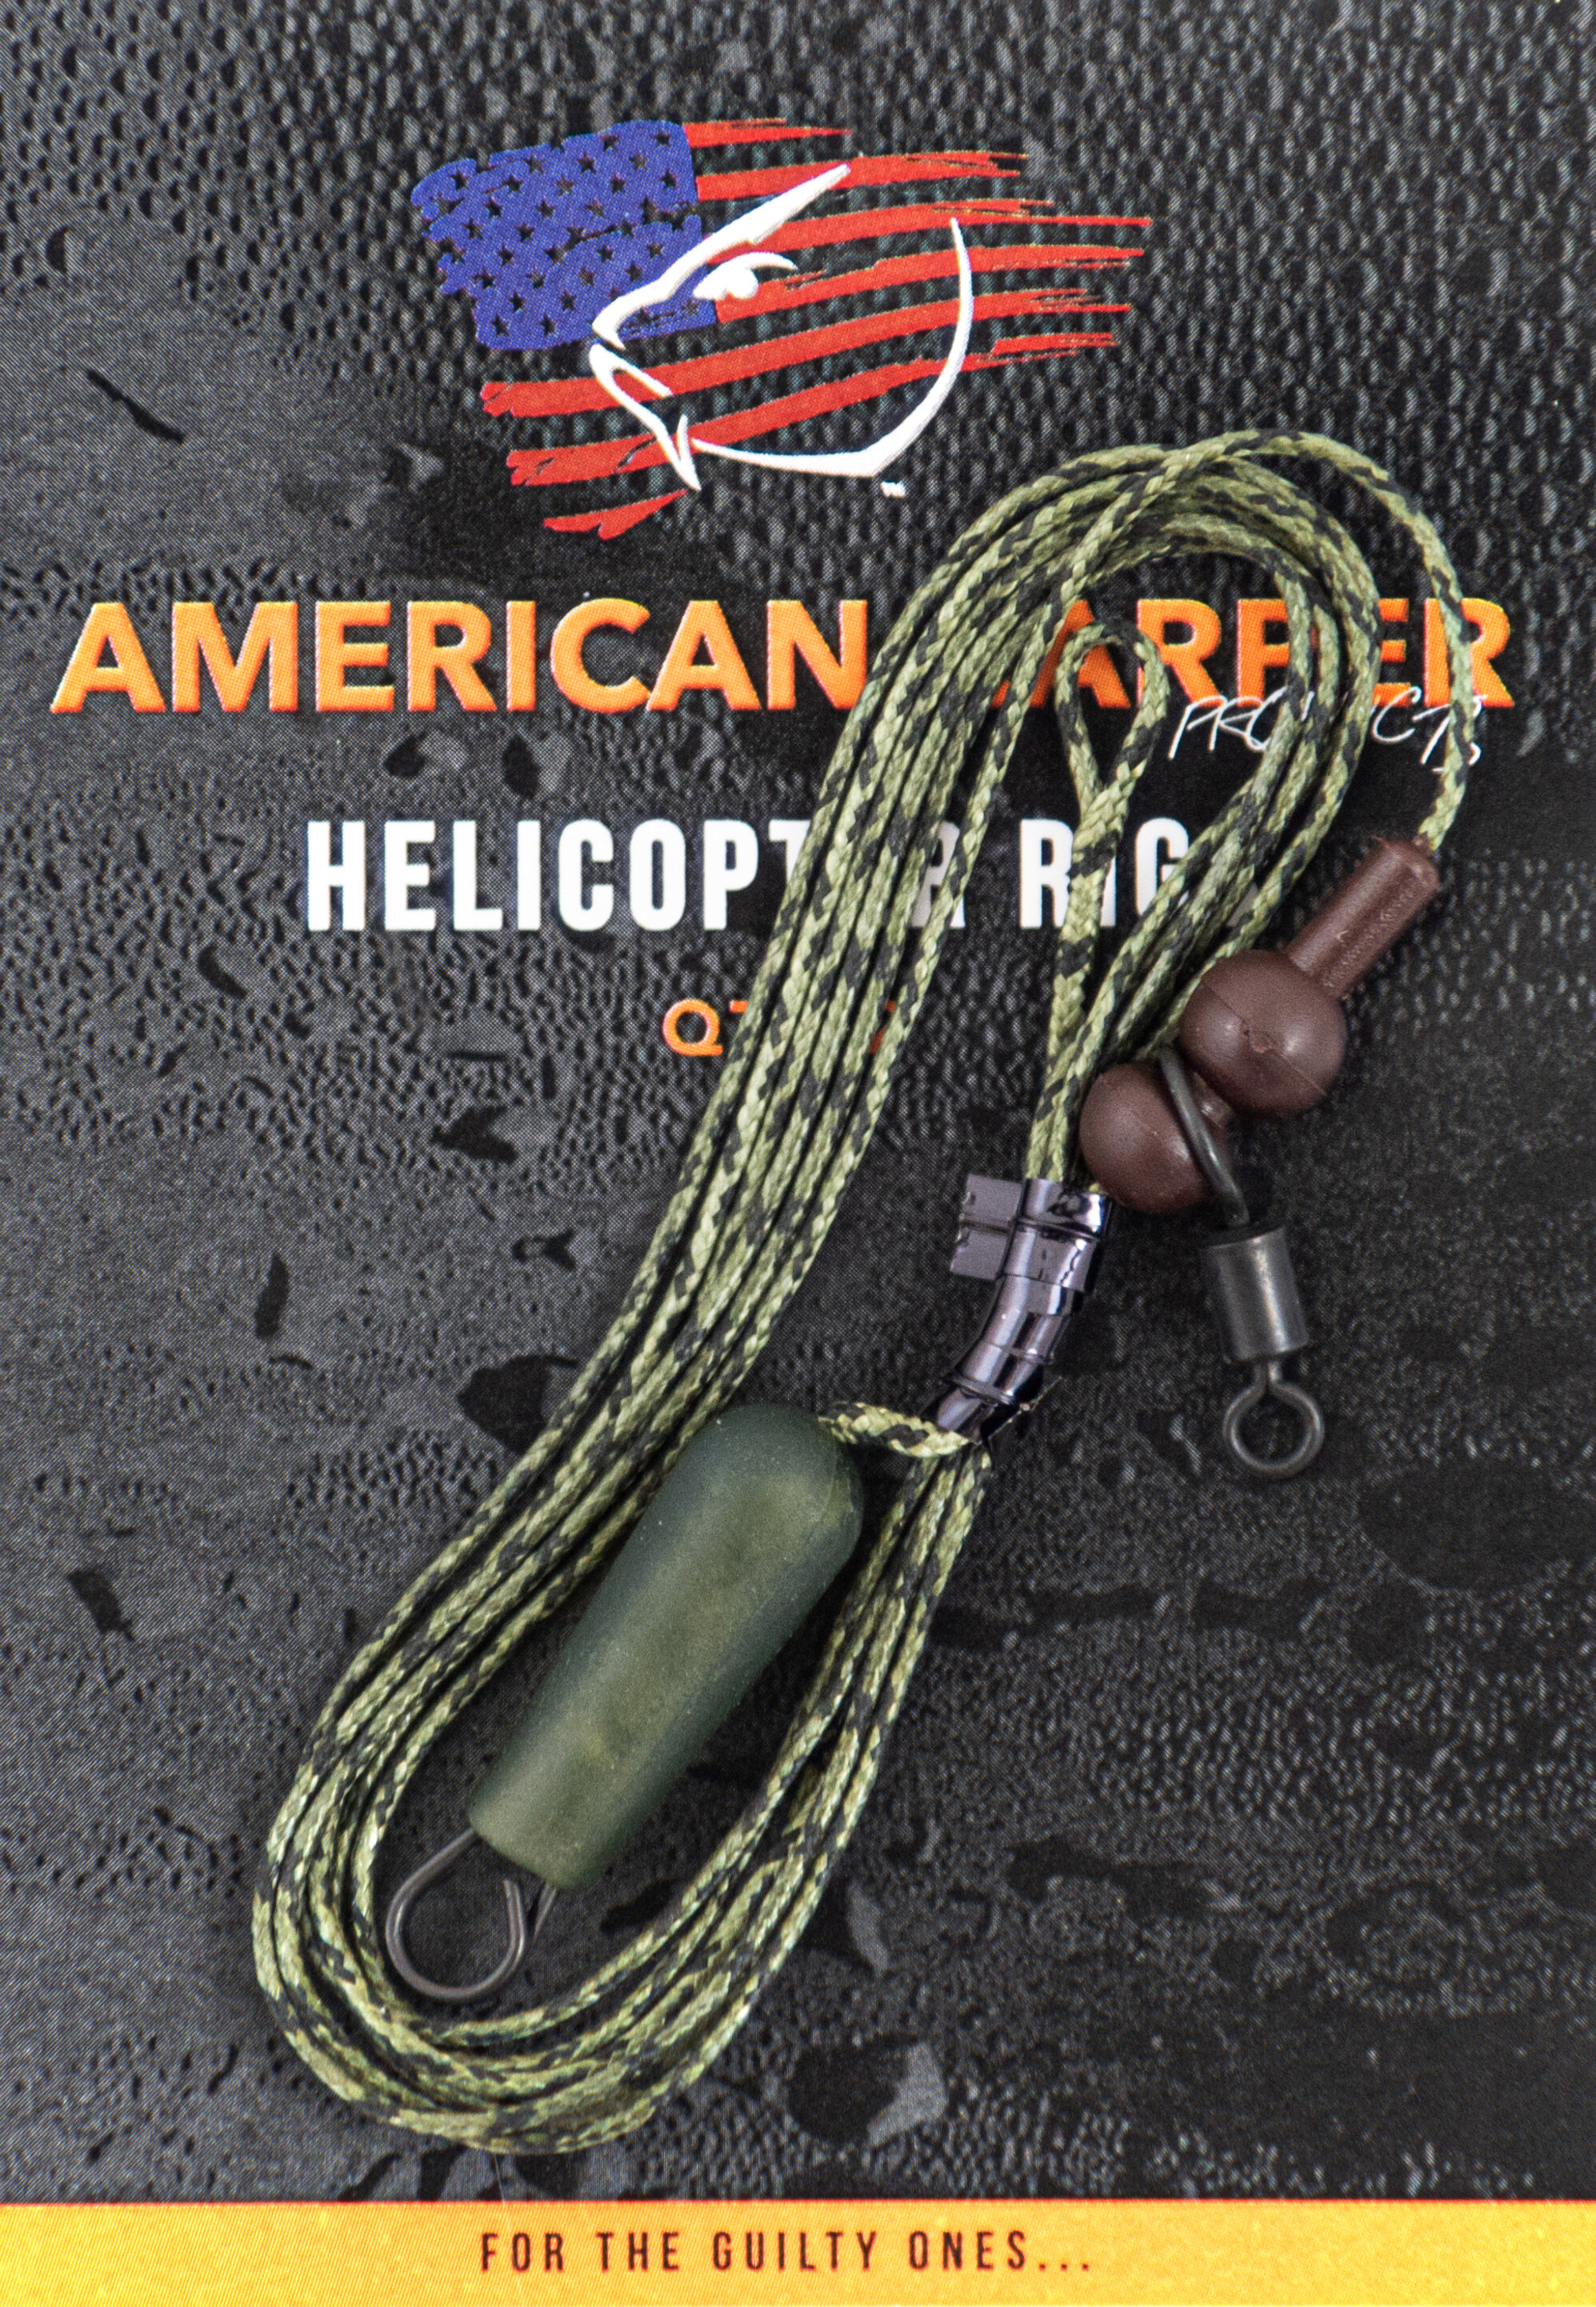 HELICOPTER RIGS CROPPED.jpg